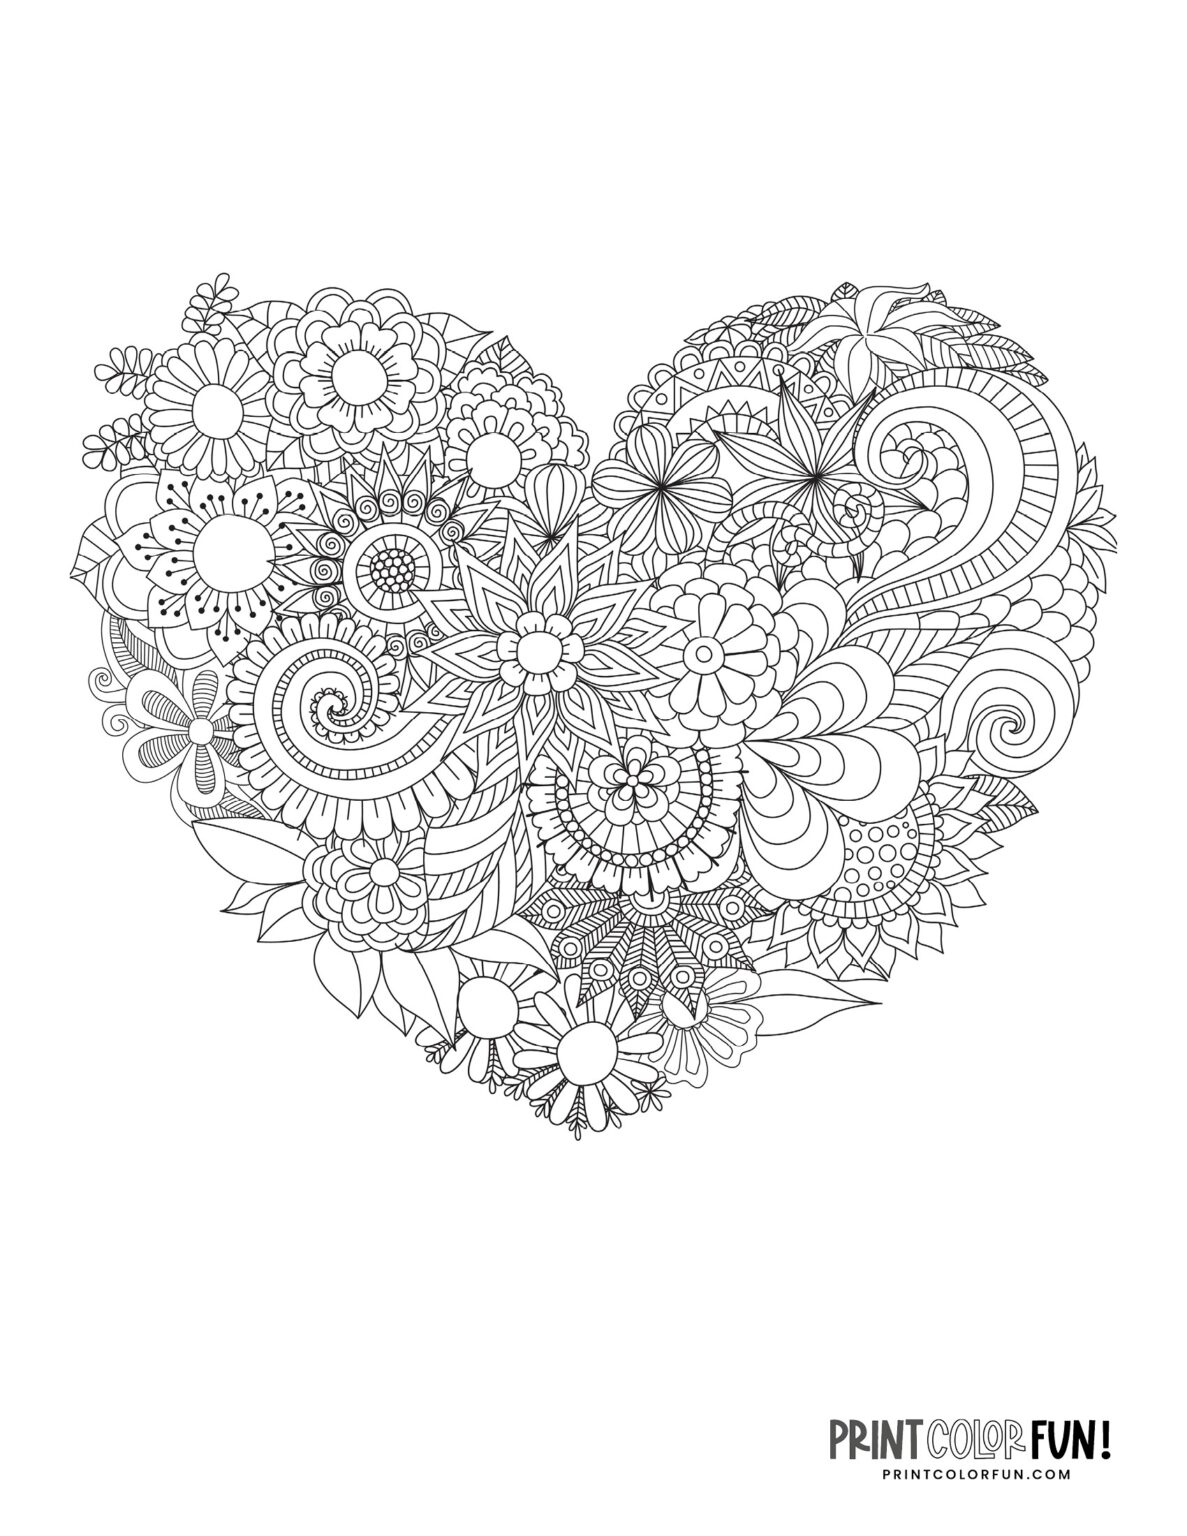 20 floral heart coloring pages, at PrintColorFun.com